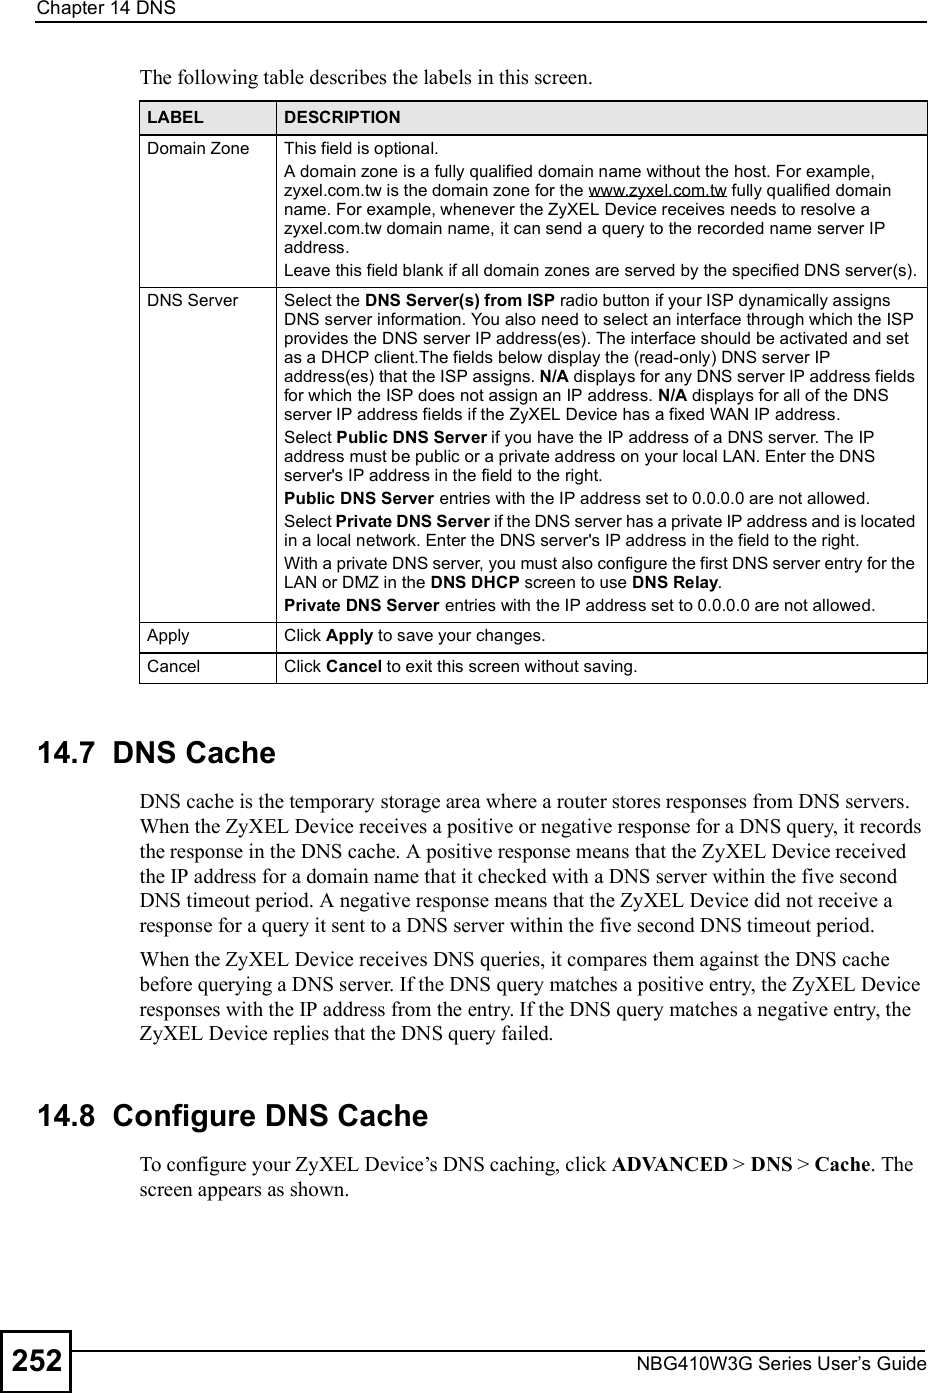 Chapter 14DNSNBG410W3G Series User s Guide252The following table describes the labels in this screen.14.7  DNS Cache  DNS cache is the temporary storage area where a router stores responses from DNS servers. When the ZyXEL Device receives a positive or negative response for a DNS query, it records the response in the DNS cache. A positive response means that the ZyXEL Device received the IP address for a domain name that it checked with a DNS server within the five second DNS timeout period. A negative response means that the ZyXEL Device did not receive a response for a query it sent to a DNS server within the five second DNS timeout period. When the ZyXEL Device receives DNS queries, it compares them against the DNS cache before querying a DNS server. If the DNS query matches a positive entry, the ZyXEL Device responses with the IP address from the entry. If the DNS query matches a negative entry, the ZyXEL Device replies that the DNS query failed.14.8  Configure DNS CacheTo configure your ZyXEL Device!s DNS caching, click ADVANCED &gt; DNS &gt; Cache. The screen appears as shown.LABEL DESCRIPTIONDomain ZoneThis field is optional.A domain zone is a fully qualified domain name without the host. For example, zyxel.com.tw is the domain zone for the www.zyxel.com.tw fully qualified domain name. For example, whenever the ZyXEL Device receives needs to resolve a zyxel.com.tw domain name, it can send a query to the recorded name server IP address.Leave this field blank if all domain zones are served by the specified DNS server(s).DNS ServerSelect the DNS Server(s) from ISP radio button if your ISP dynamically assigns DNS server information. You also need to select an interface through which the ISP provides the DNS server IP address(es). The interface should be activated and set as a DHCP client.The fields below display the (read-only) DNS server IP address(es) that the ISP assigns. N/A displays for any DNS server IP address fields for which the ISP does not assign an IP address. N/A displays for all of the DNS server IP address fields if the ZyXEL Device has a fixed WAN IP address. Select Public DNS Server if you have the IP address of a DNS server. The IP address must be public or a private address on your local LAN. Enter the DNS server&apos;s IP address in the field to the right. Public DNS Server entries with the IP address set to 0.0.0.0 are not allowed. Select Private DNS Server if the DNS server has a private IP address and is located in a local network. Enter the DNS server&apos;s IP address in the field to the right. With a private DNS server, you must also configure the first DNS server entry for the LAN or DMZ in the DNS DHCP screen to use DNS Relay.Private DNS Server entries with the IP address set to 0.0.0.0 are not allowed.ApplyClick Apply to save your changes.CancelClick Cancel to exit this screen without saving.